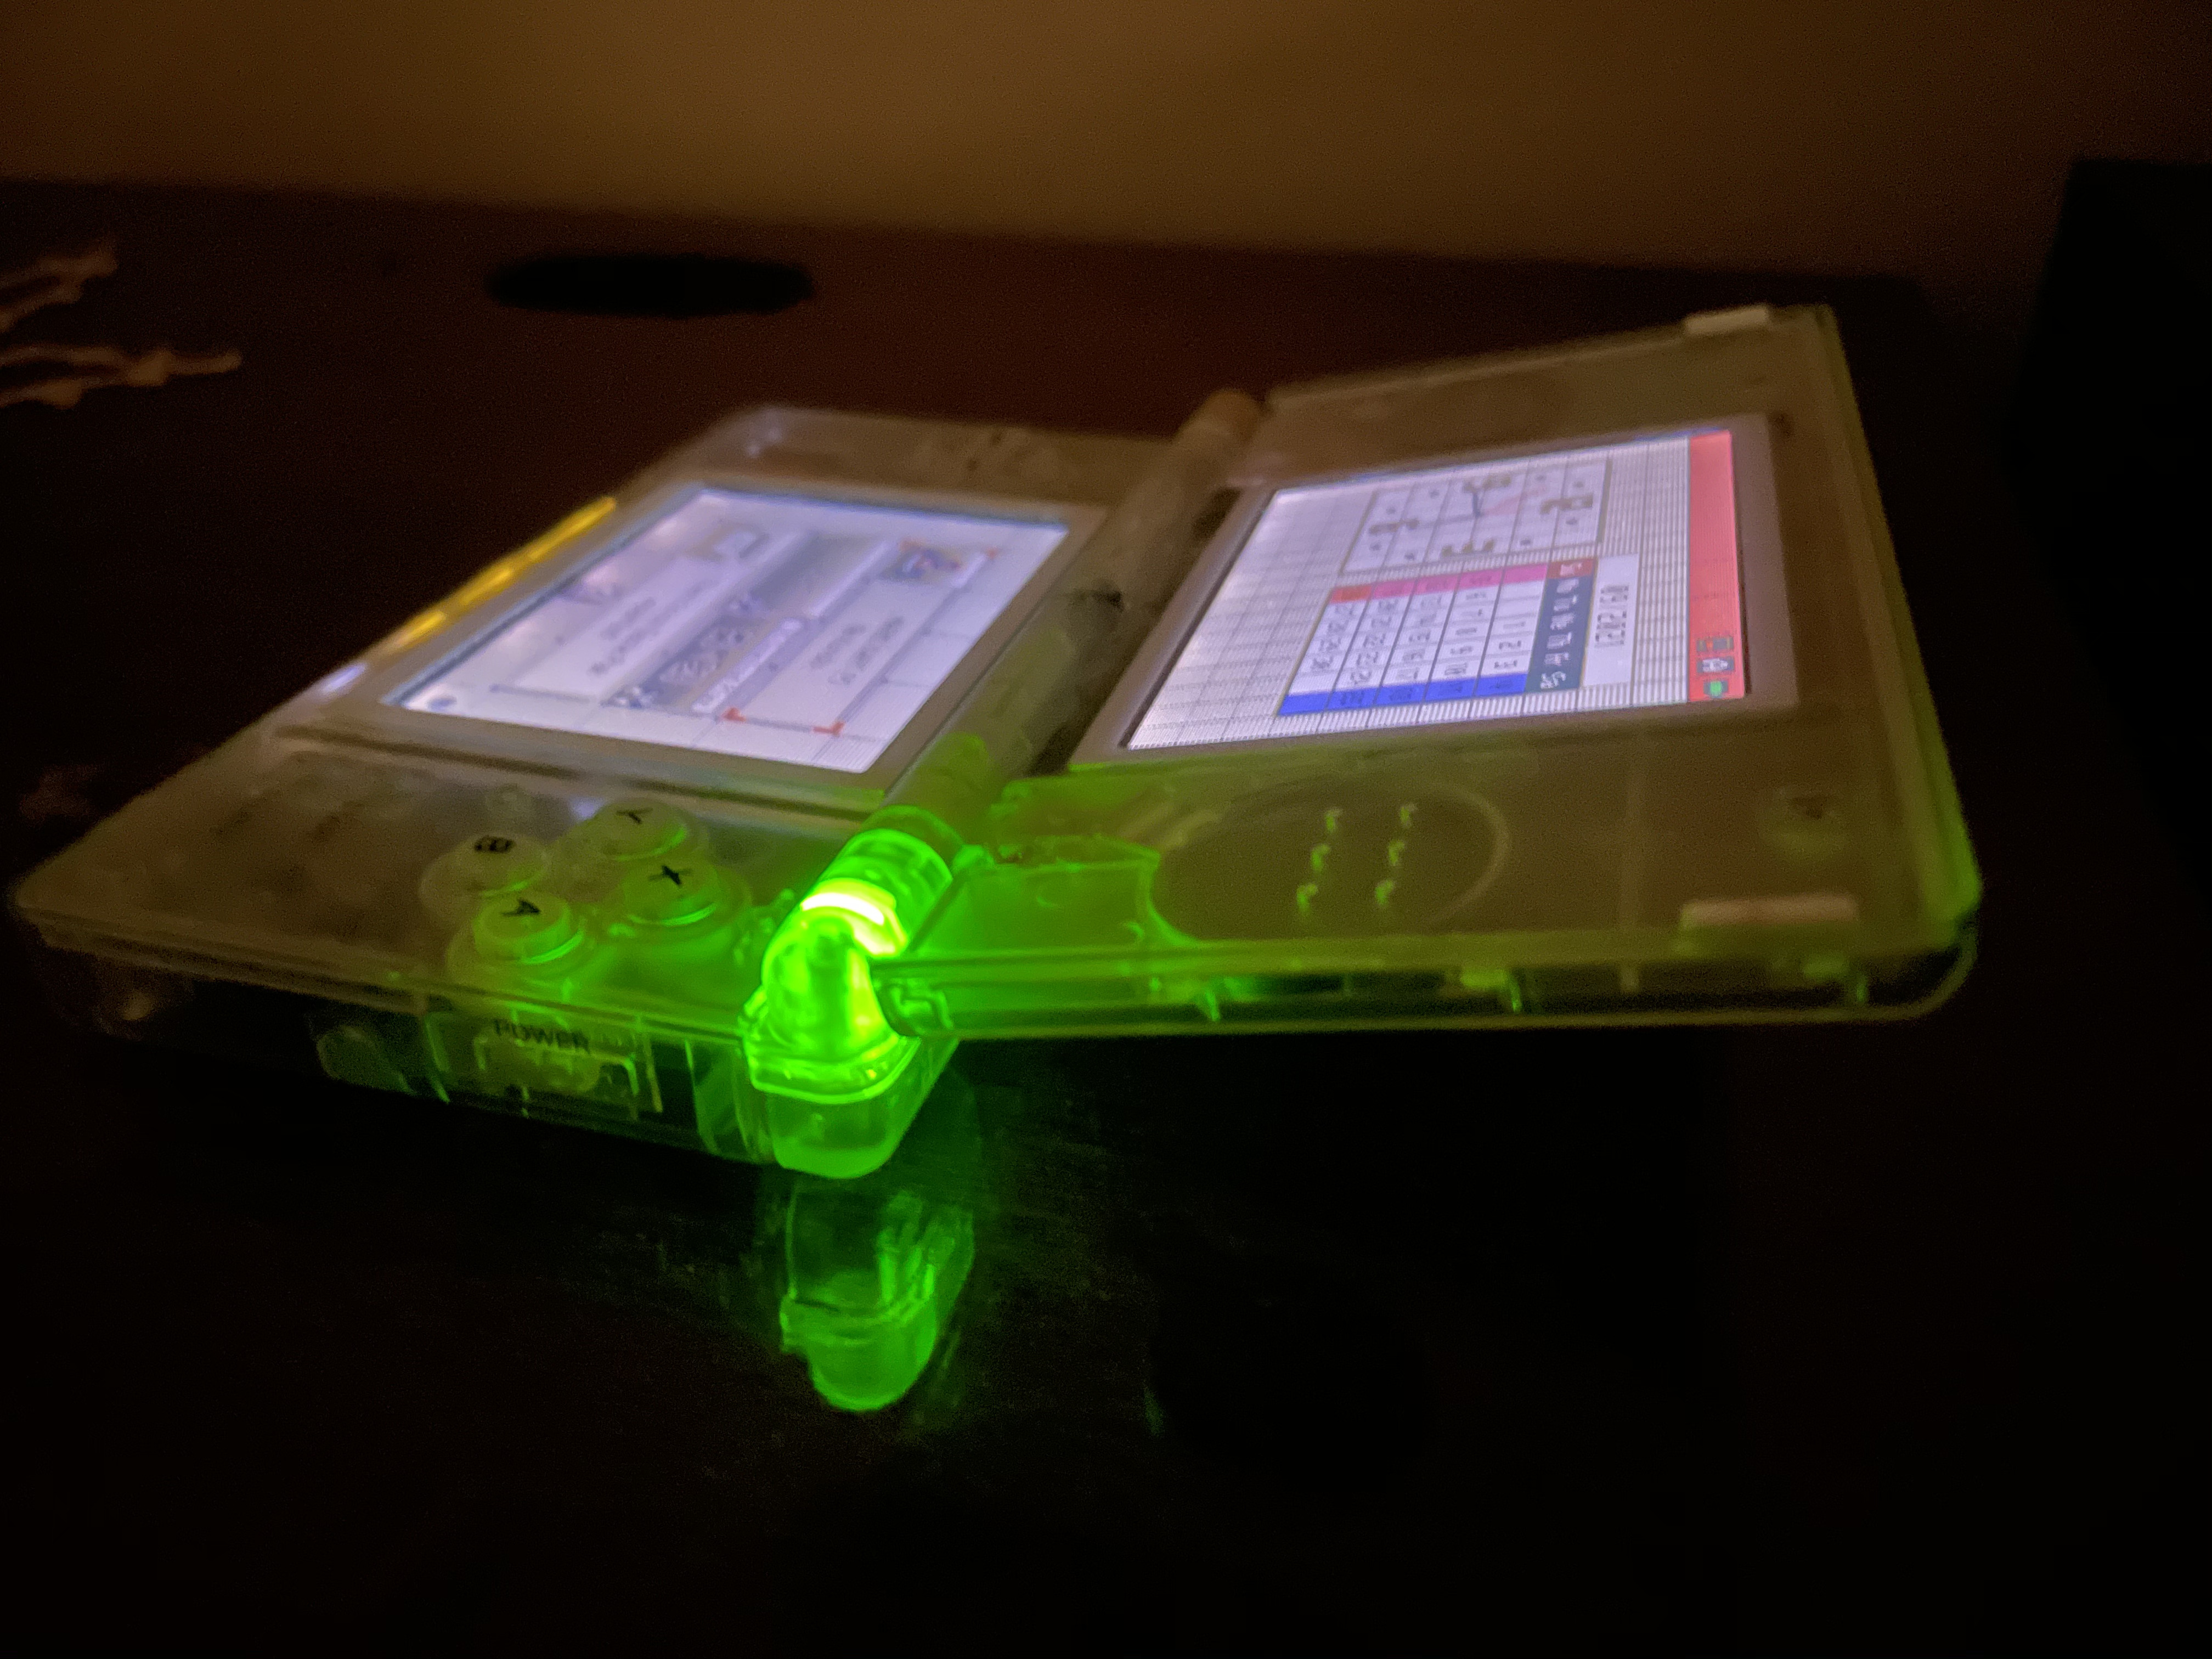 The clear DS Lite powered on